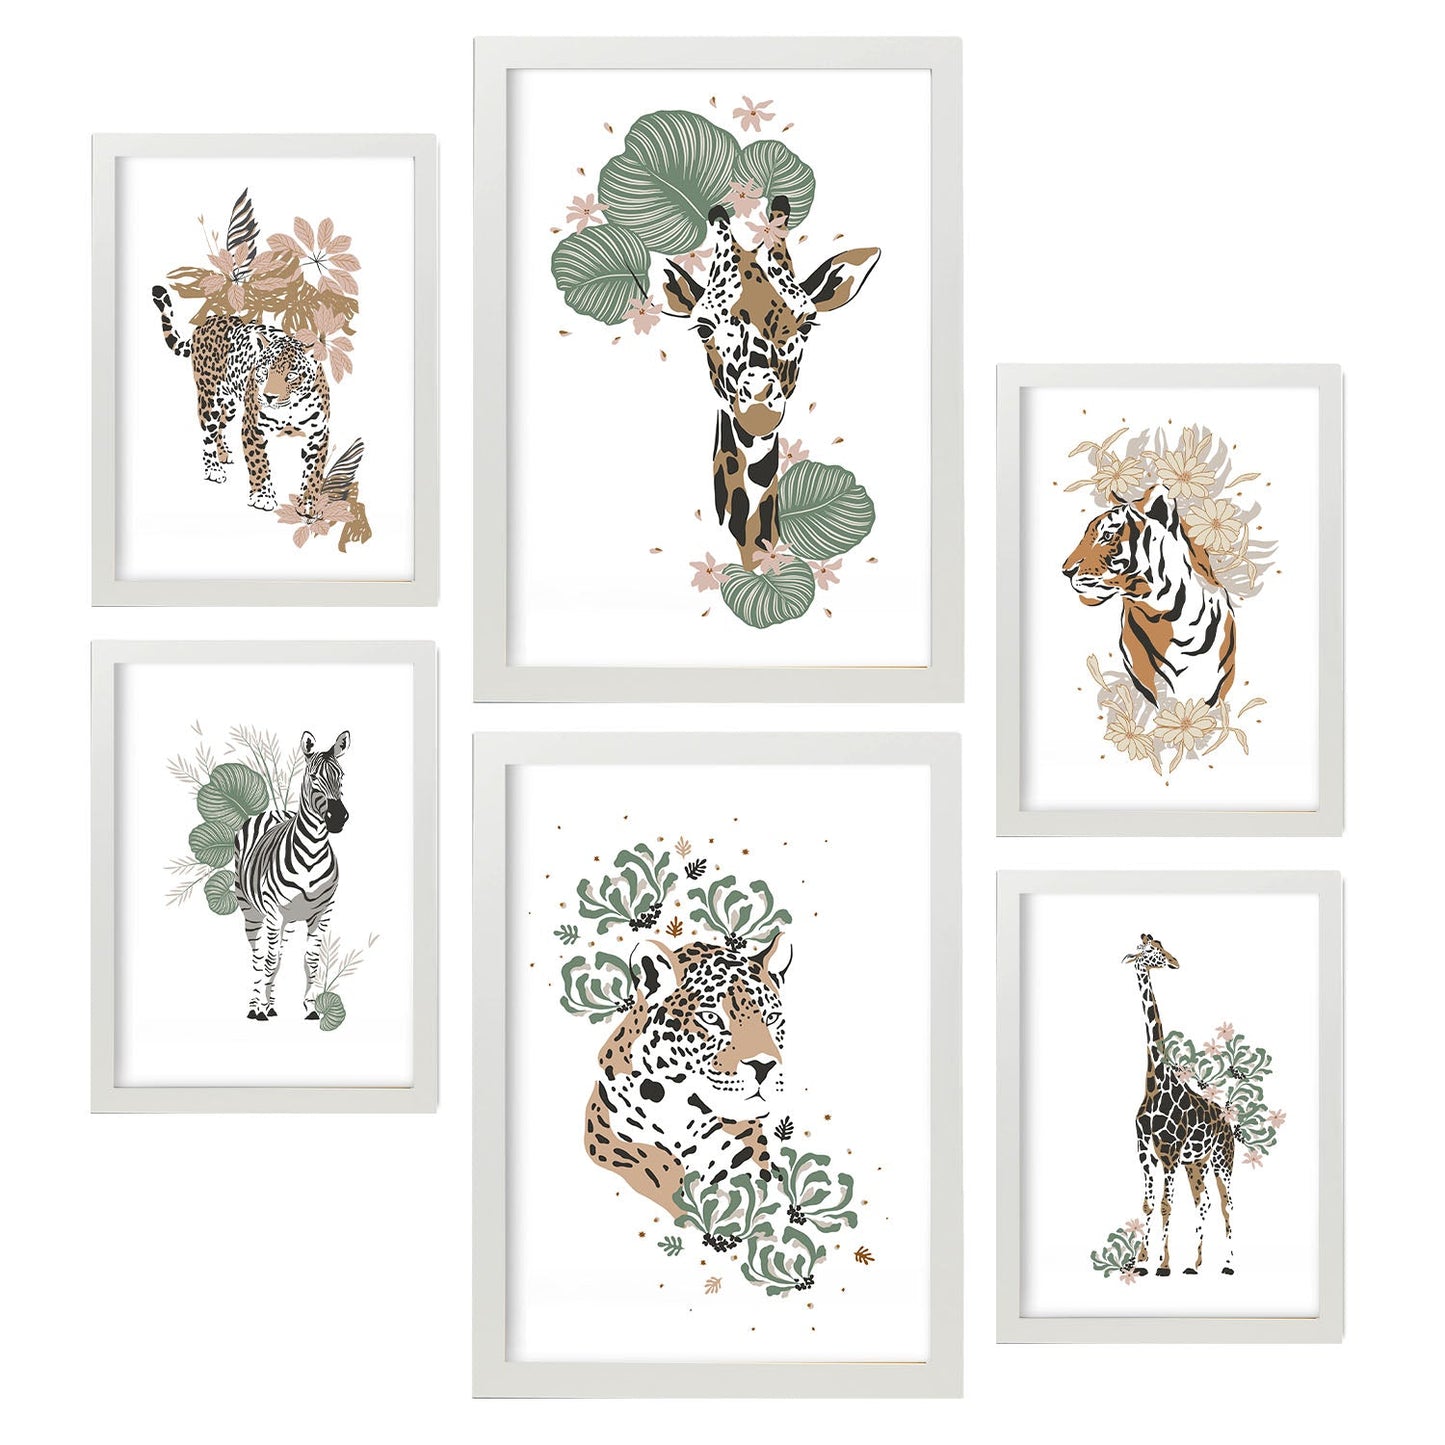 Nacnic animales selva. Aesthetic Wall Art Prints for Bedroom or Living Room Design.